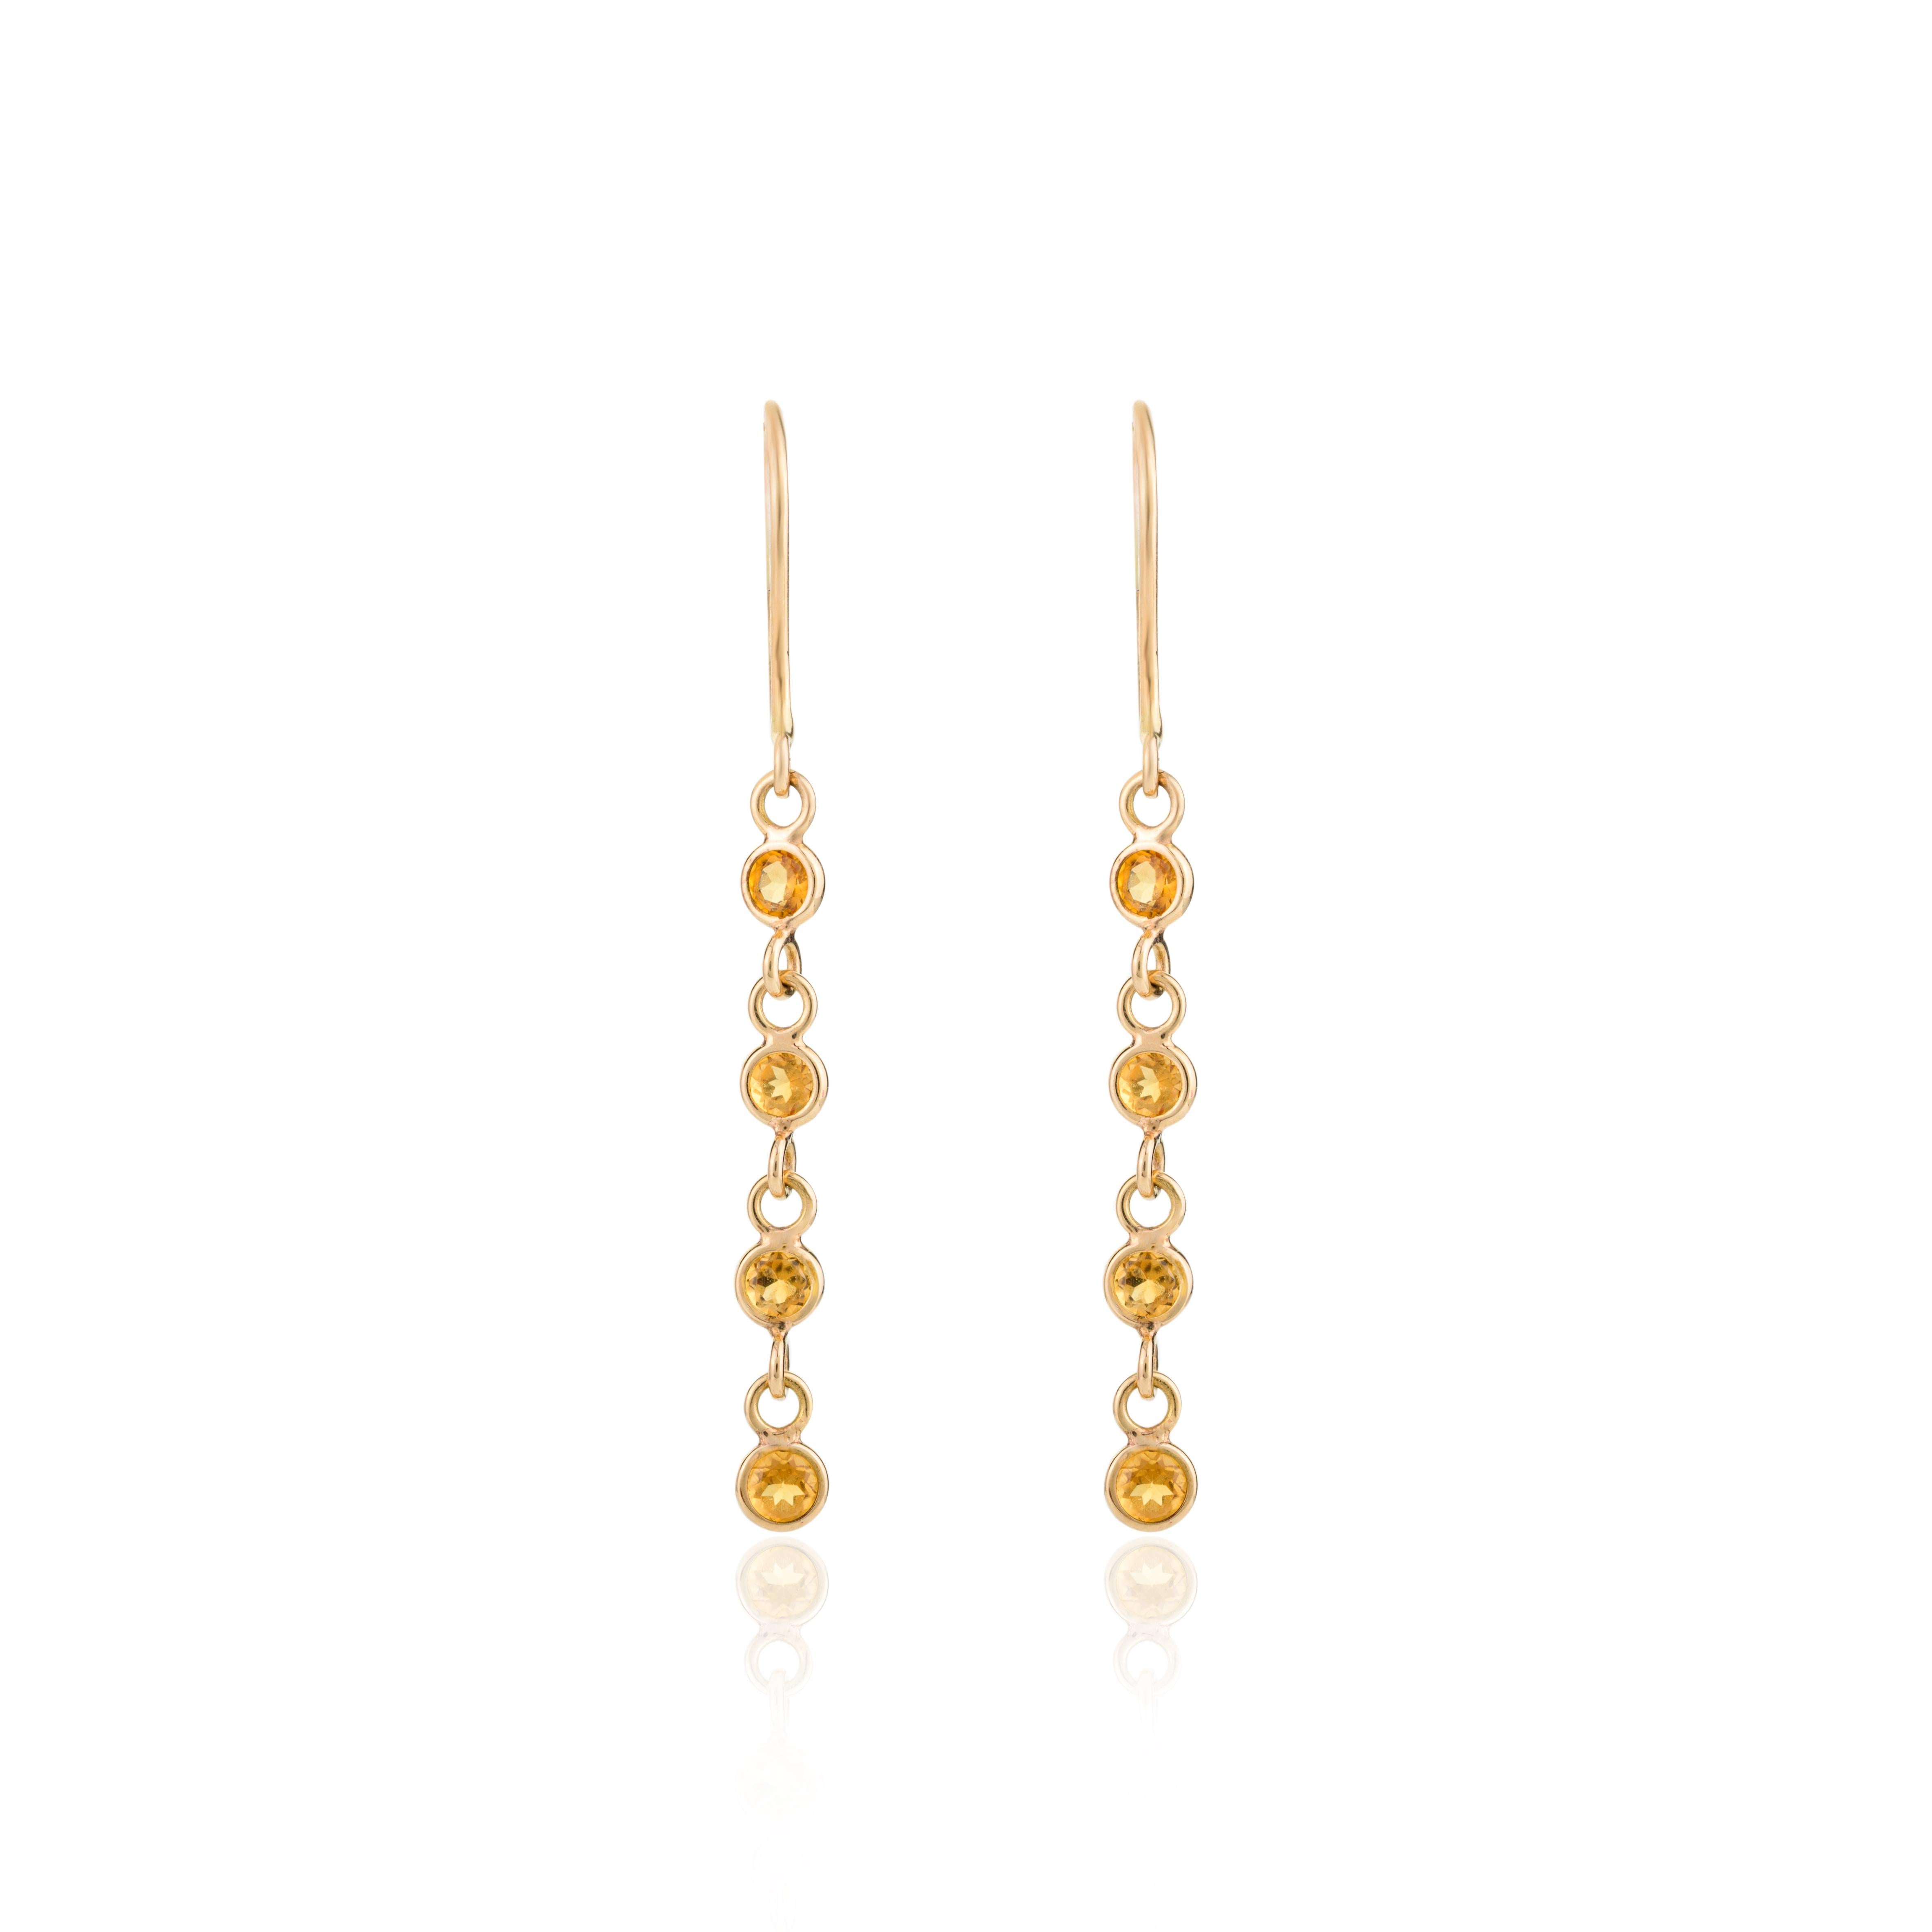 Round Cut Tiny Citrine Dangle Earrings Made in 18k Solid Yellow Gold Gift for Her For Sale